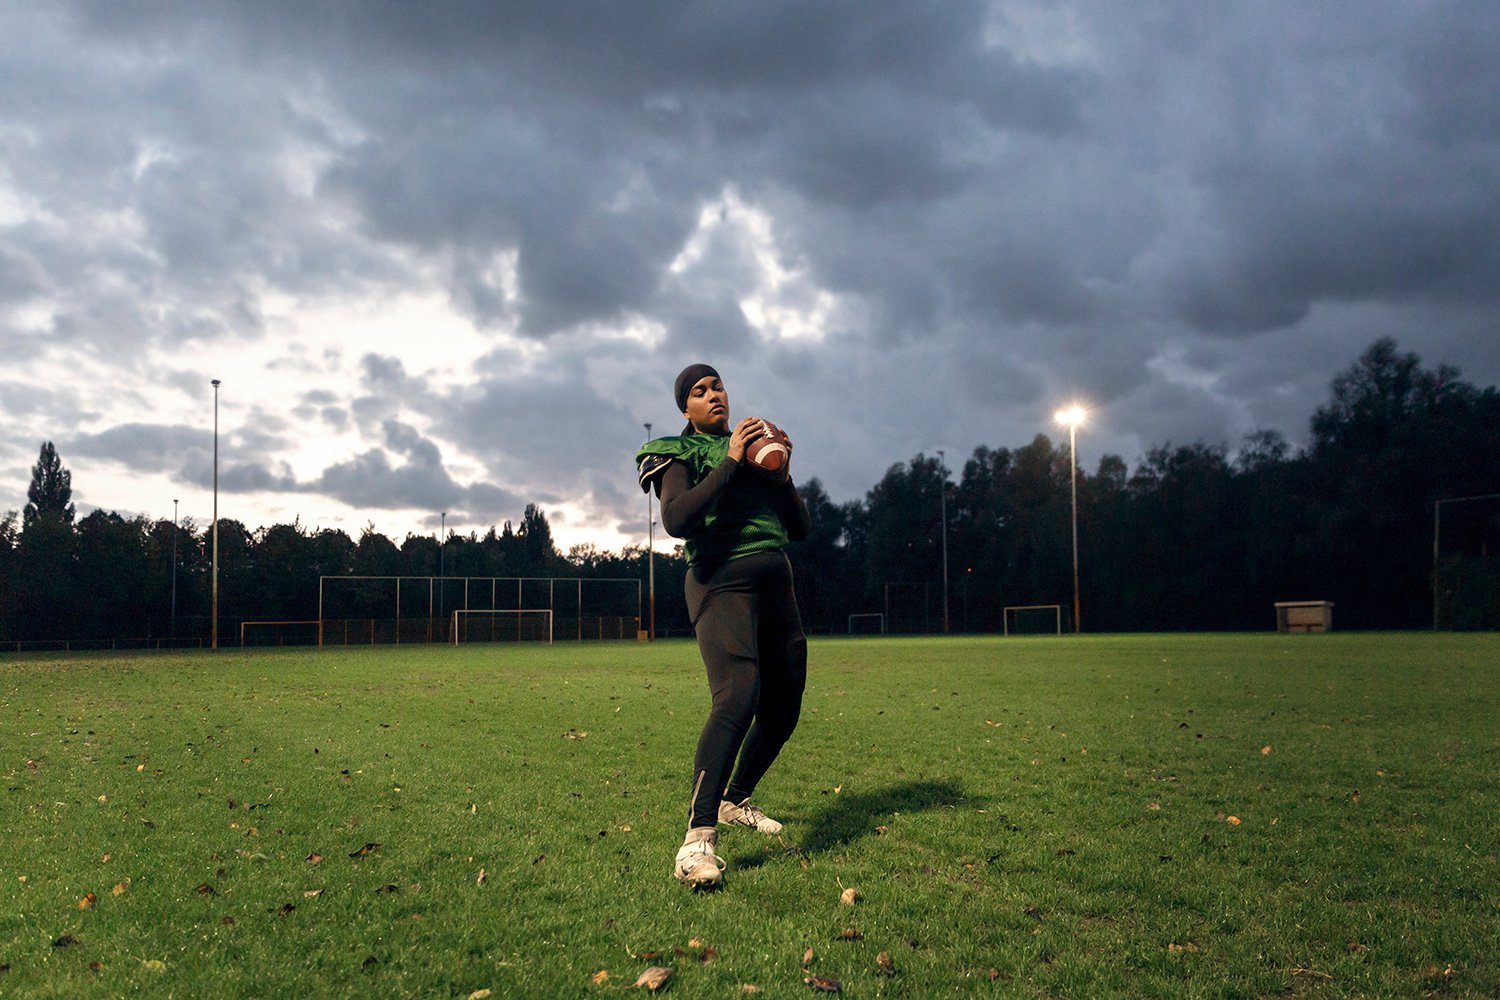  Lisa, a tight end for the Rotterdam Ravens, during practice, Rotterdam, NL, 2020. At the time, the Cats were the only QFL team who had access to dedicated American football facilities — the field belonging to the Crusaders, Amsterdam's male American